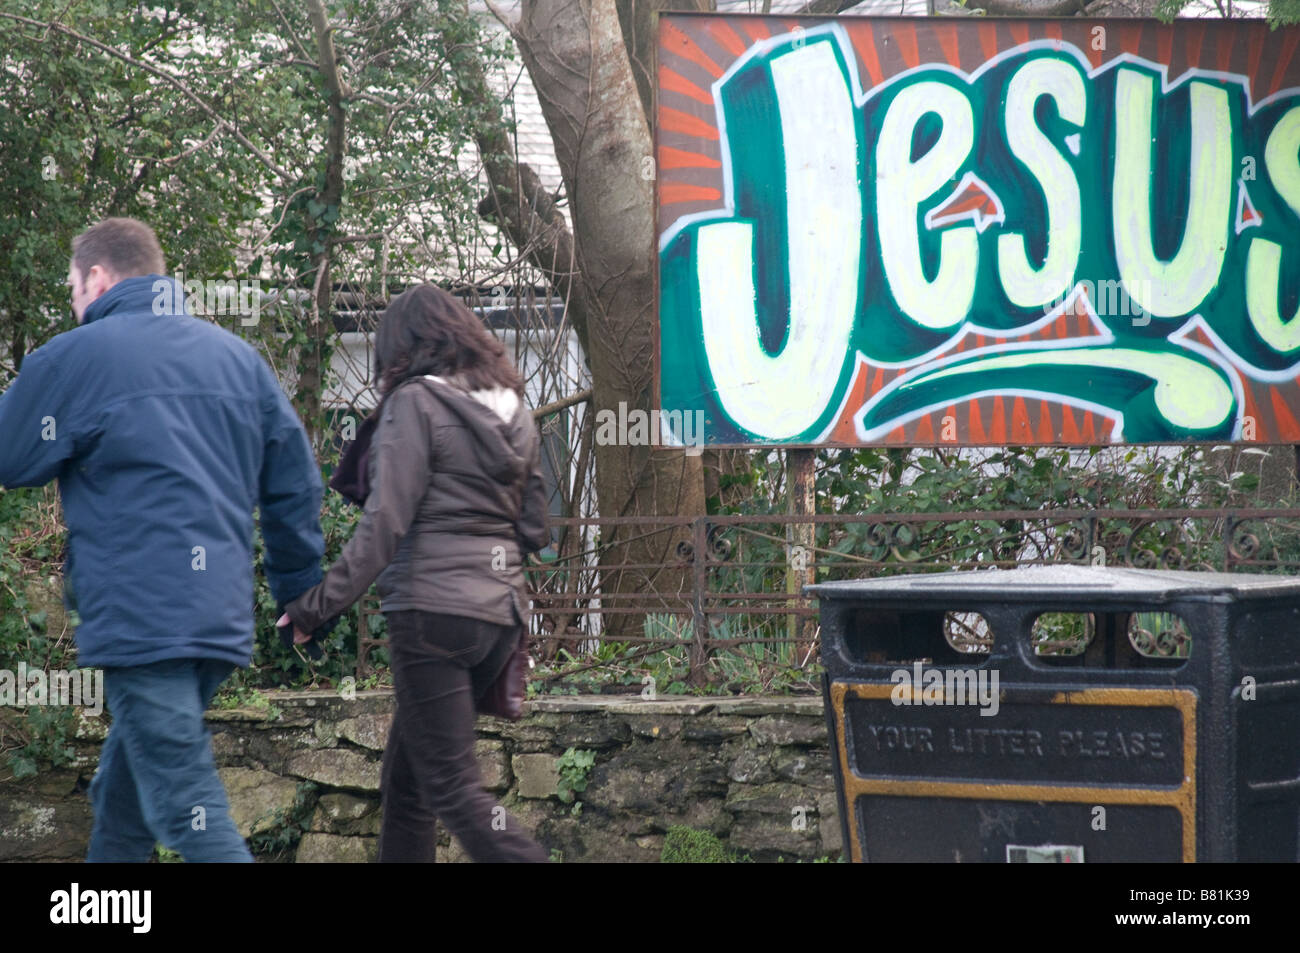 two people walk past a Jesus sign in Falmouth, UK Stock Photo